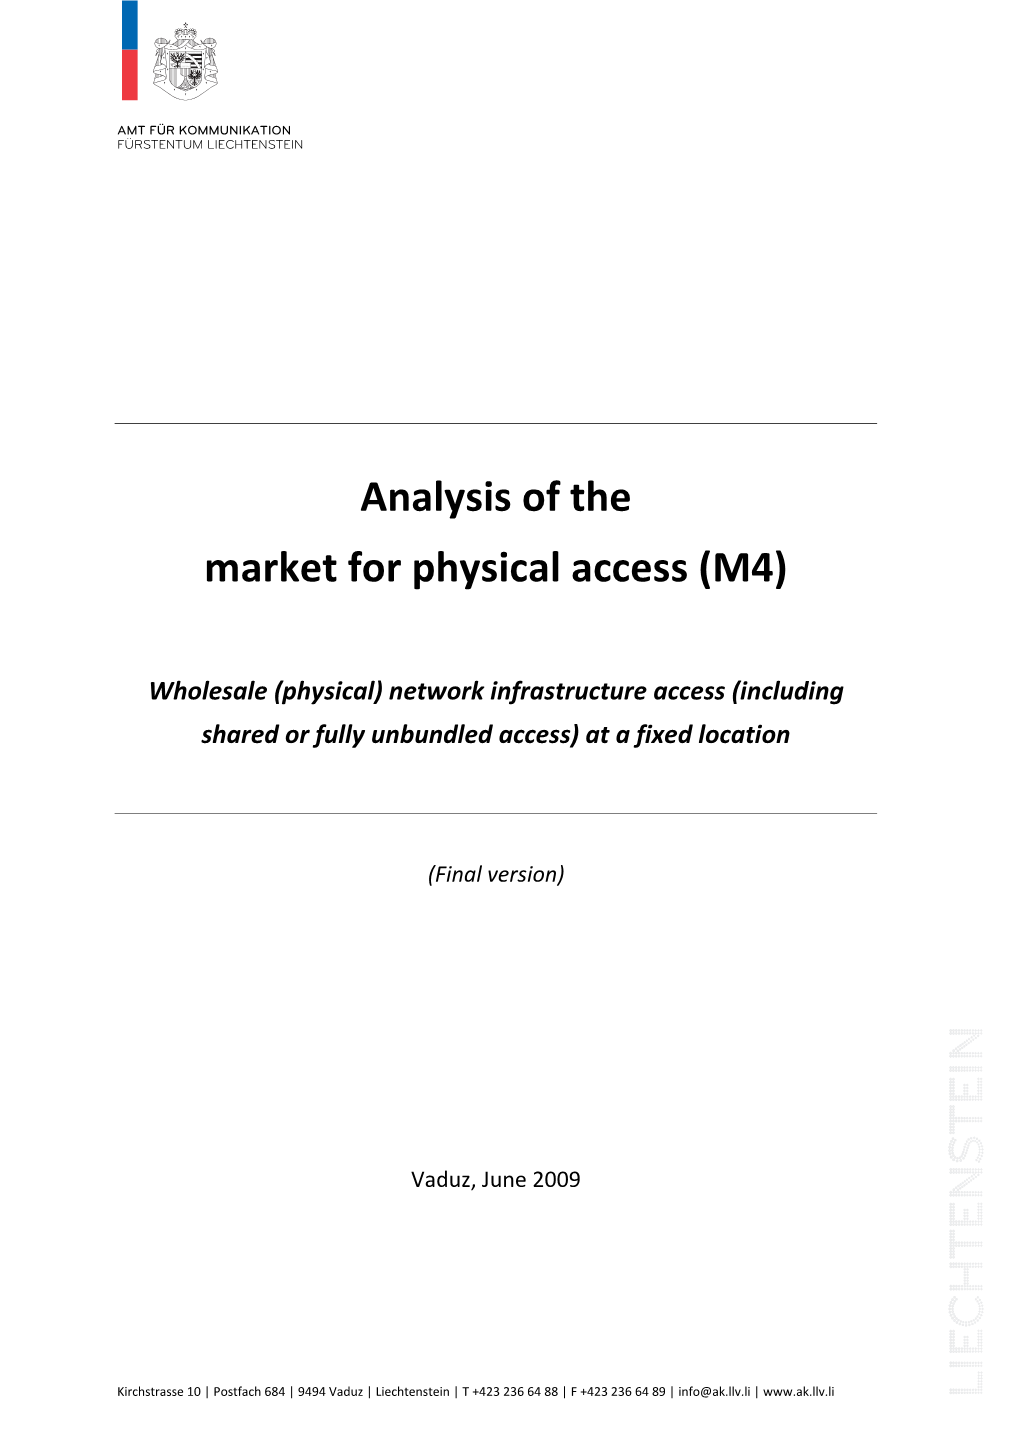 Analysis of the Market for Physical Access (M4)